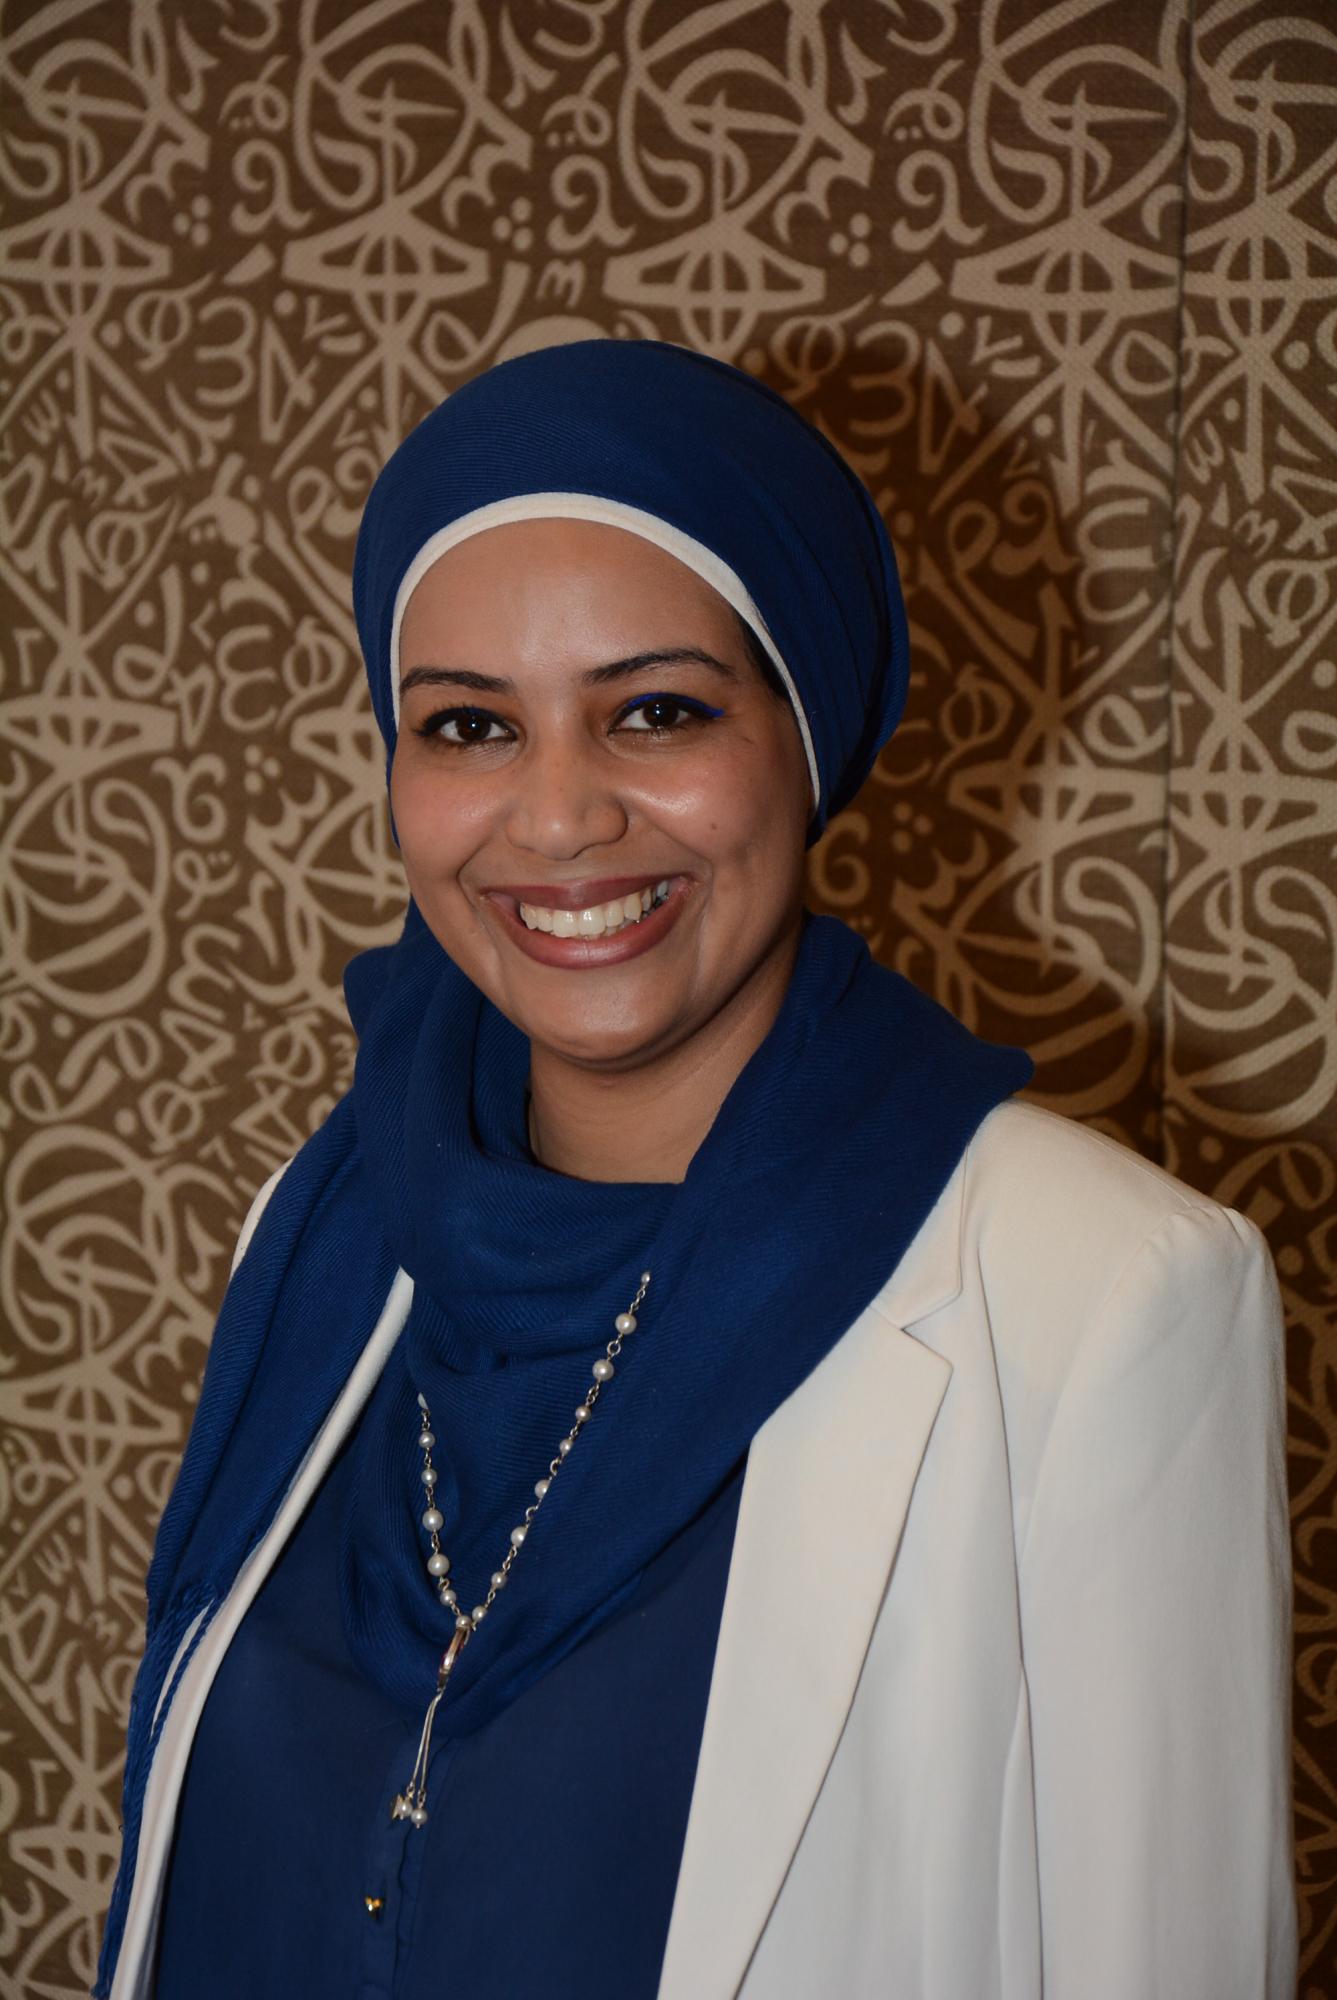 Master's student Eman Motawi is double majoring in community psychology and sustainable development at AUC